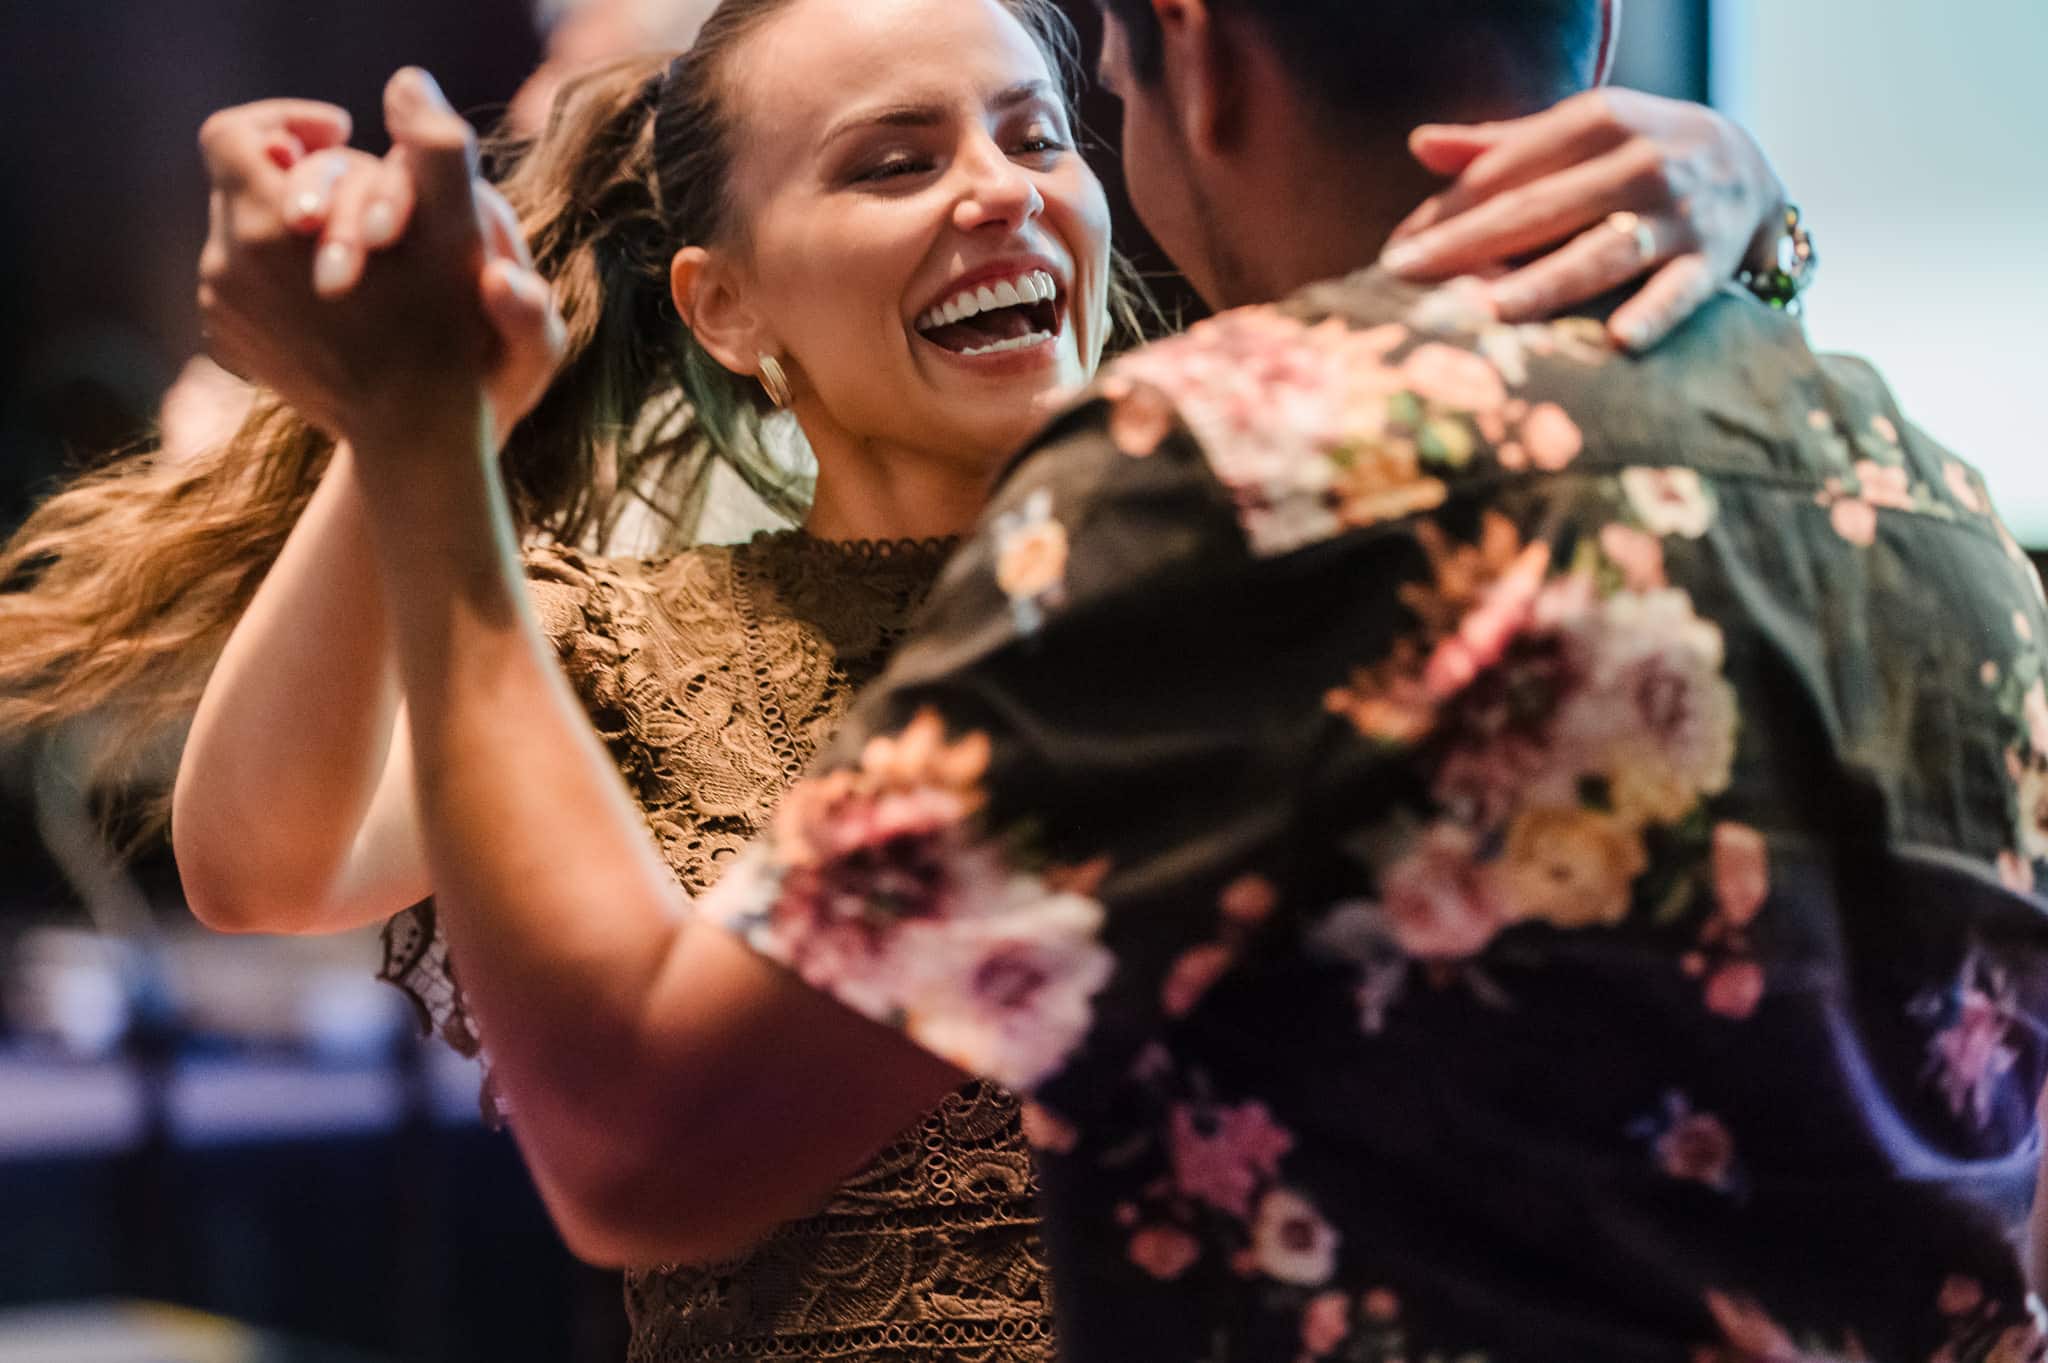 A woman smiles broadly as her partner moves her across the dance floor at the Ritz Carlton.